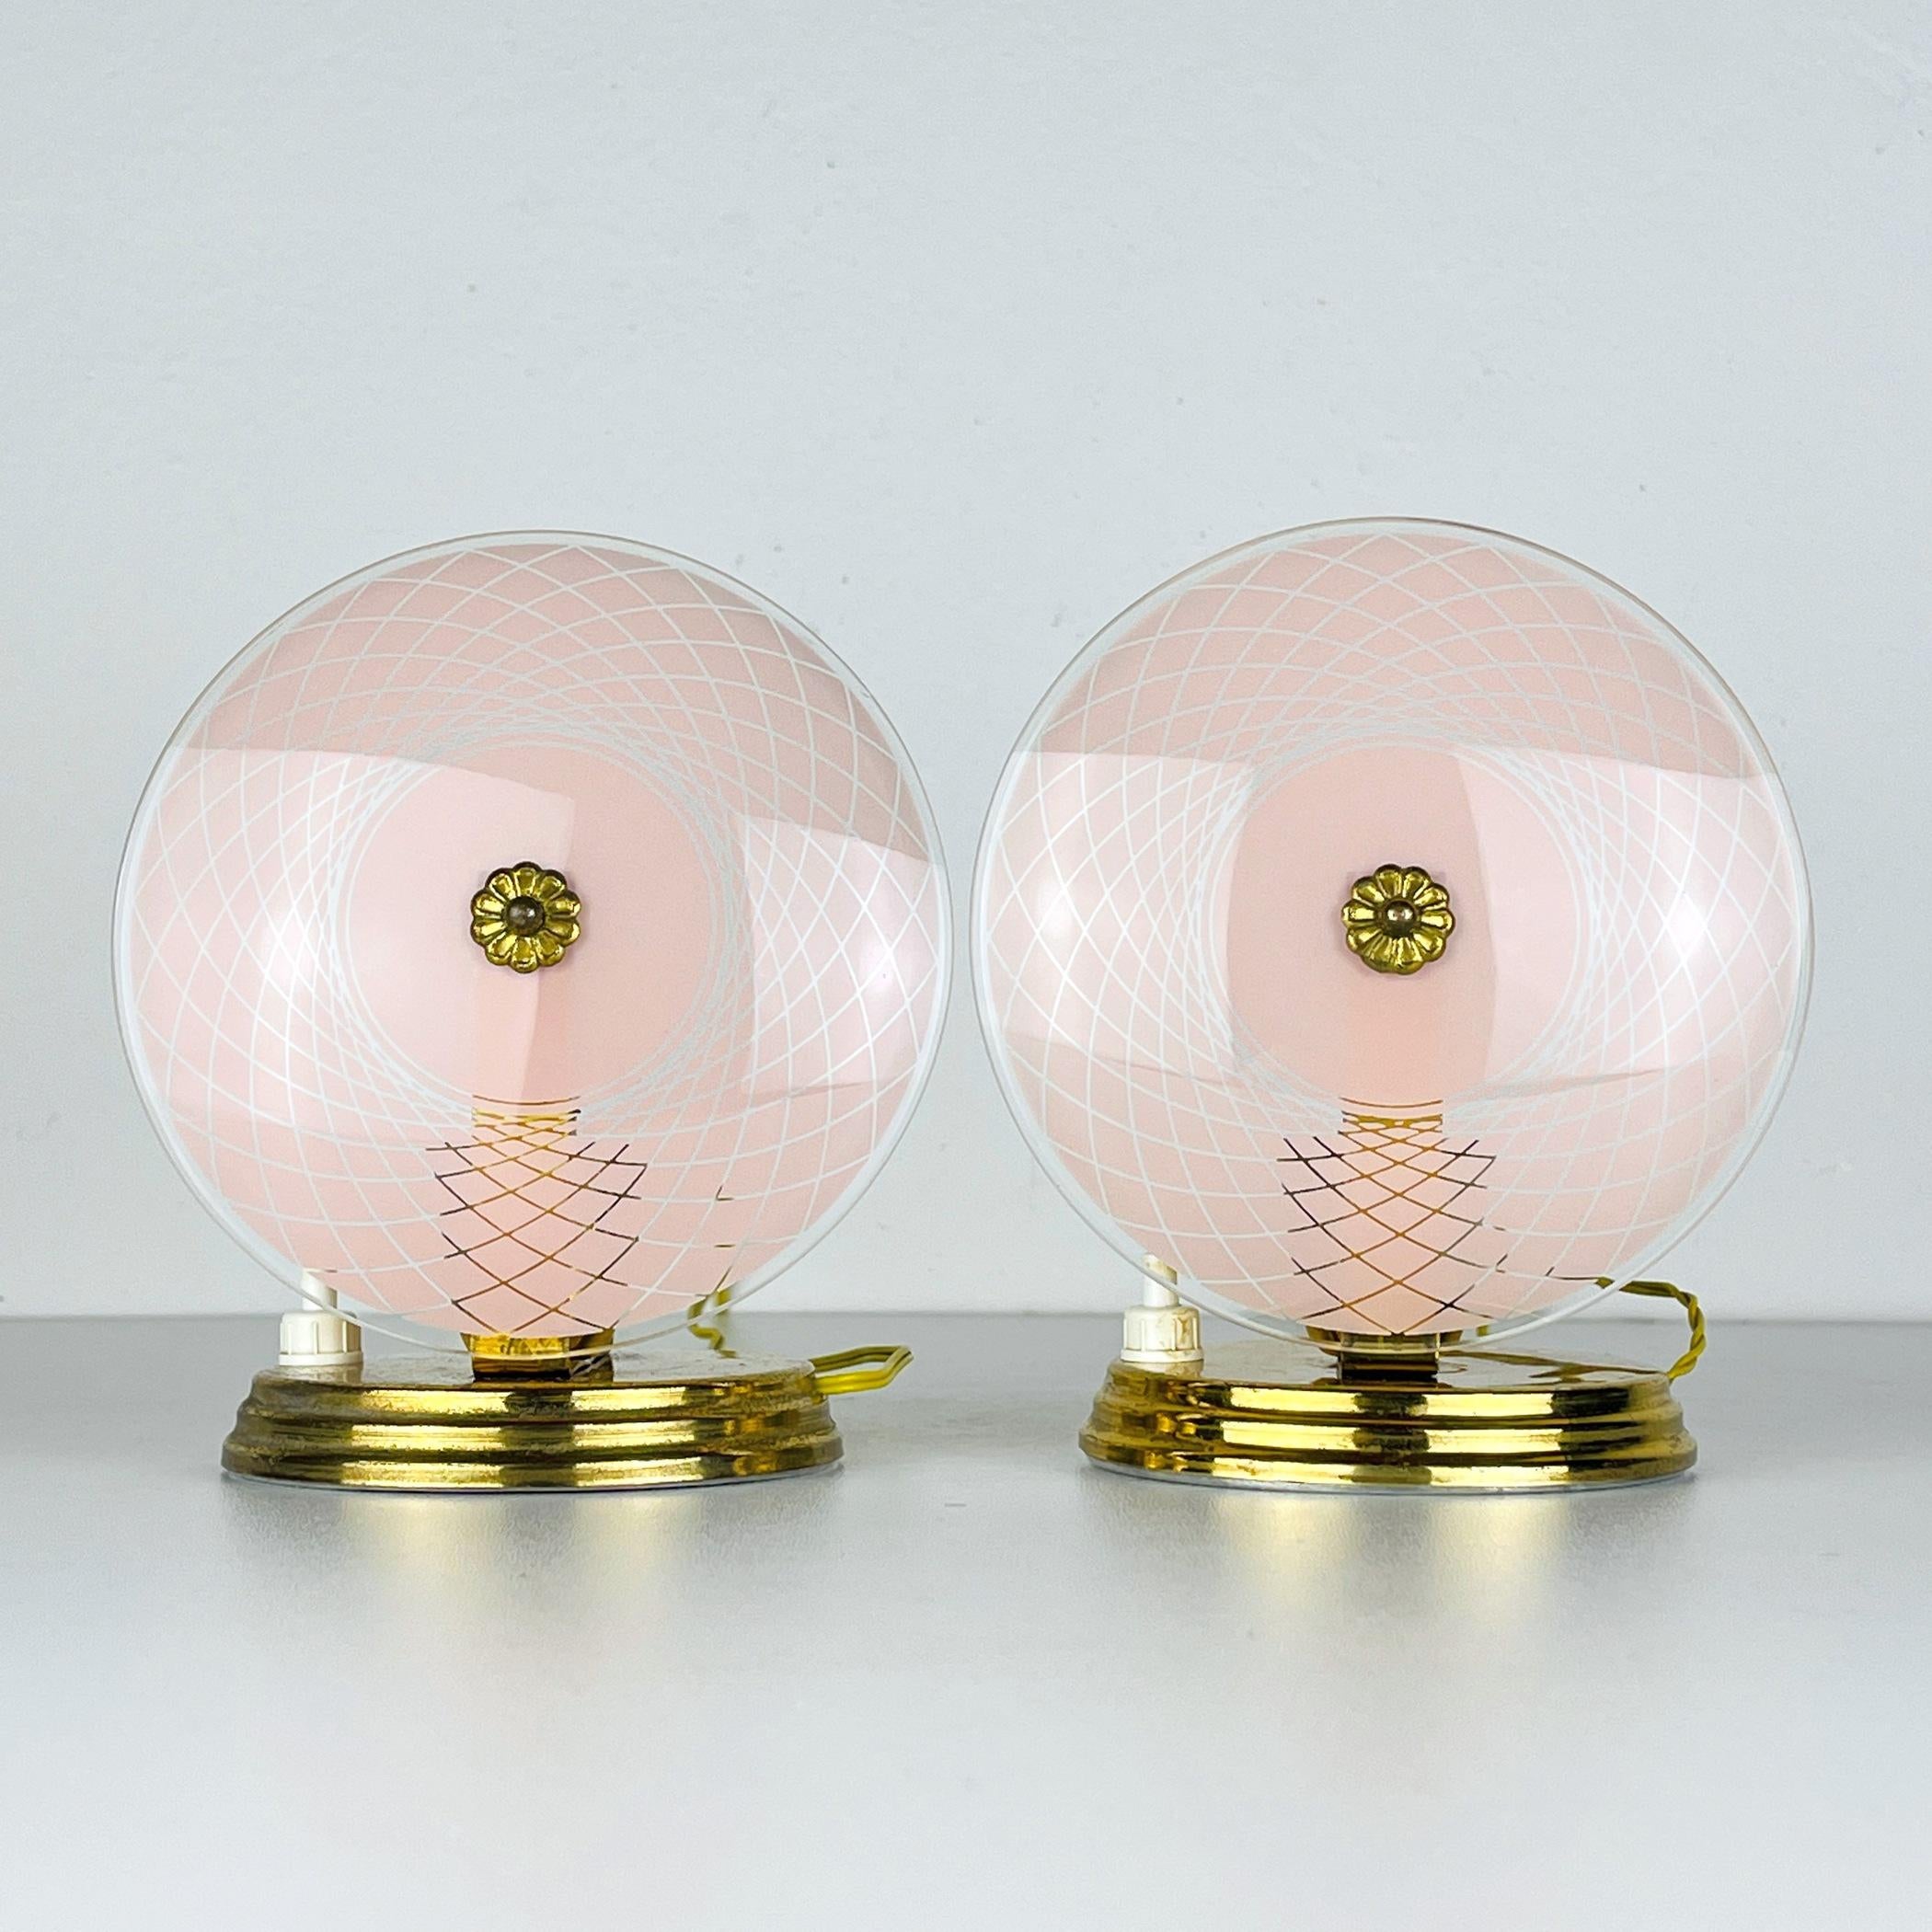 Enhance your space with this delightful pair of table lamps, crafted in Italy during the 1950s. Their enchanting color and graceful light patina imbue them with a timeless charm, making them a versatile addition suitable for bedrooms, nurseries, and